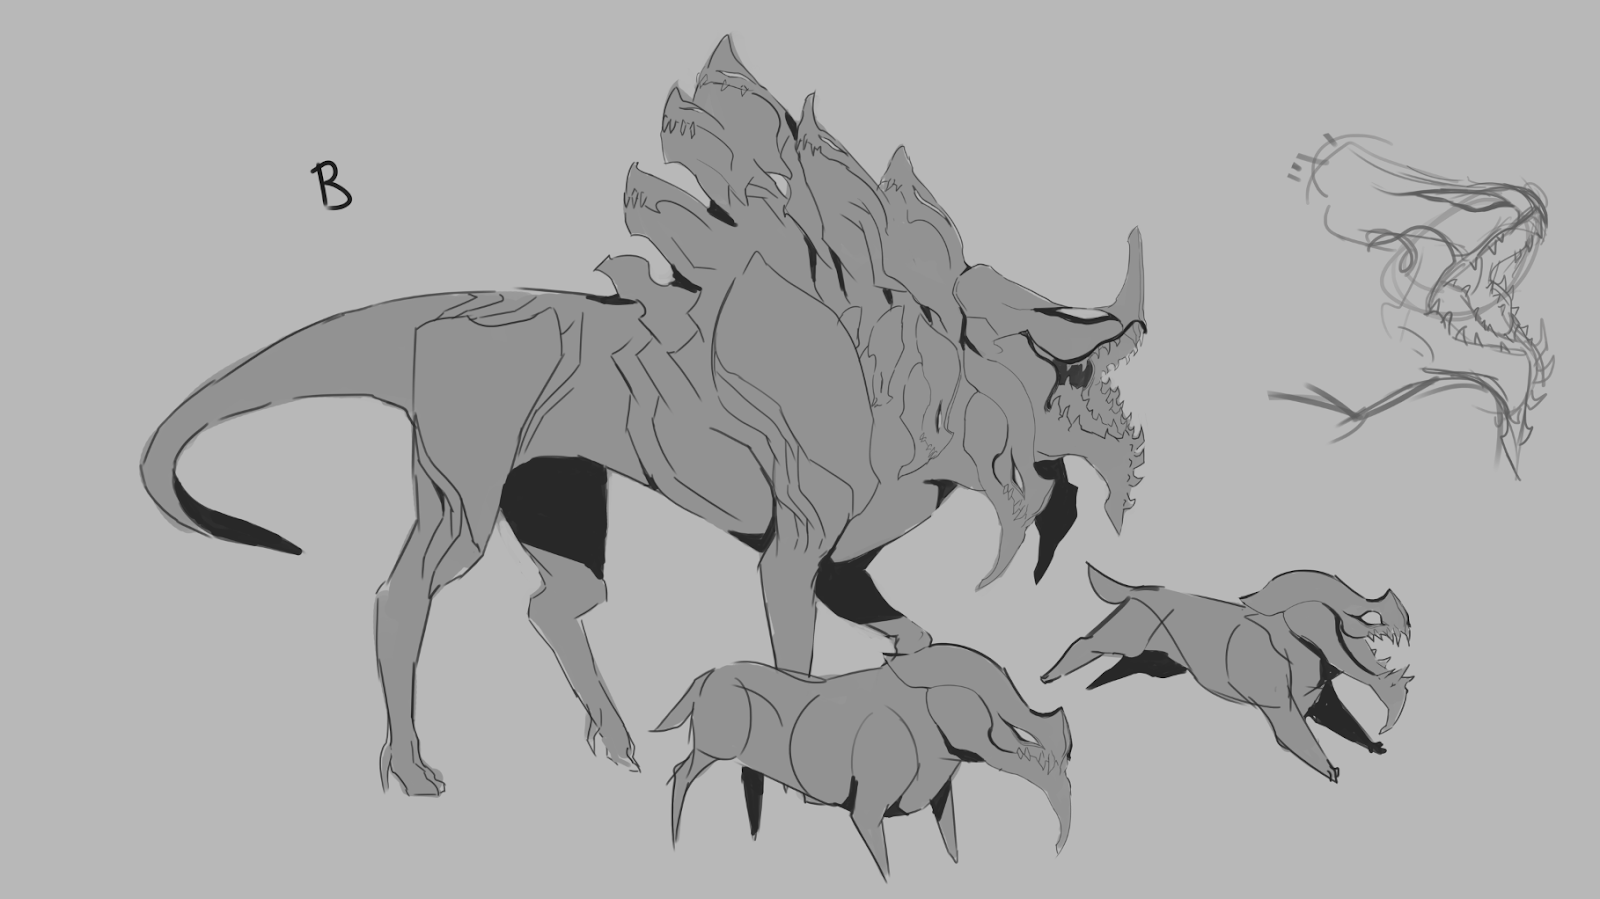 06222023_Champion_Insights_NaafiriArticle_Early_Darkin_Hound_Concept.png